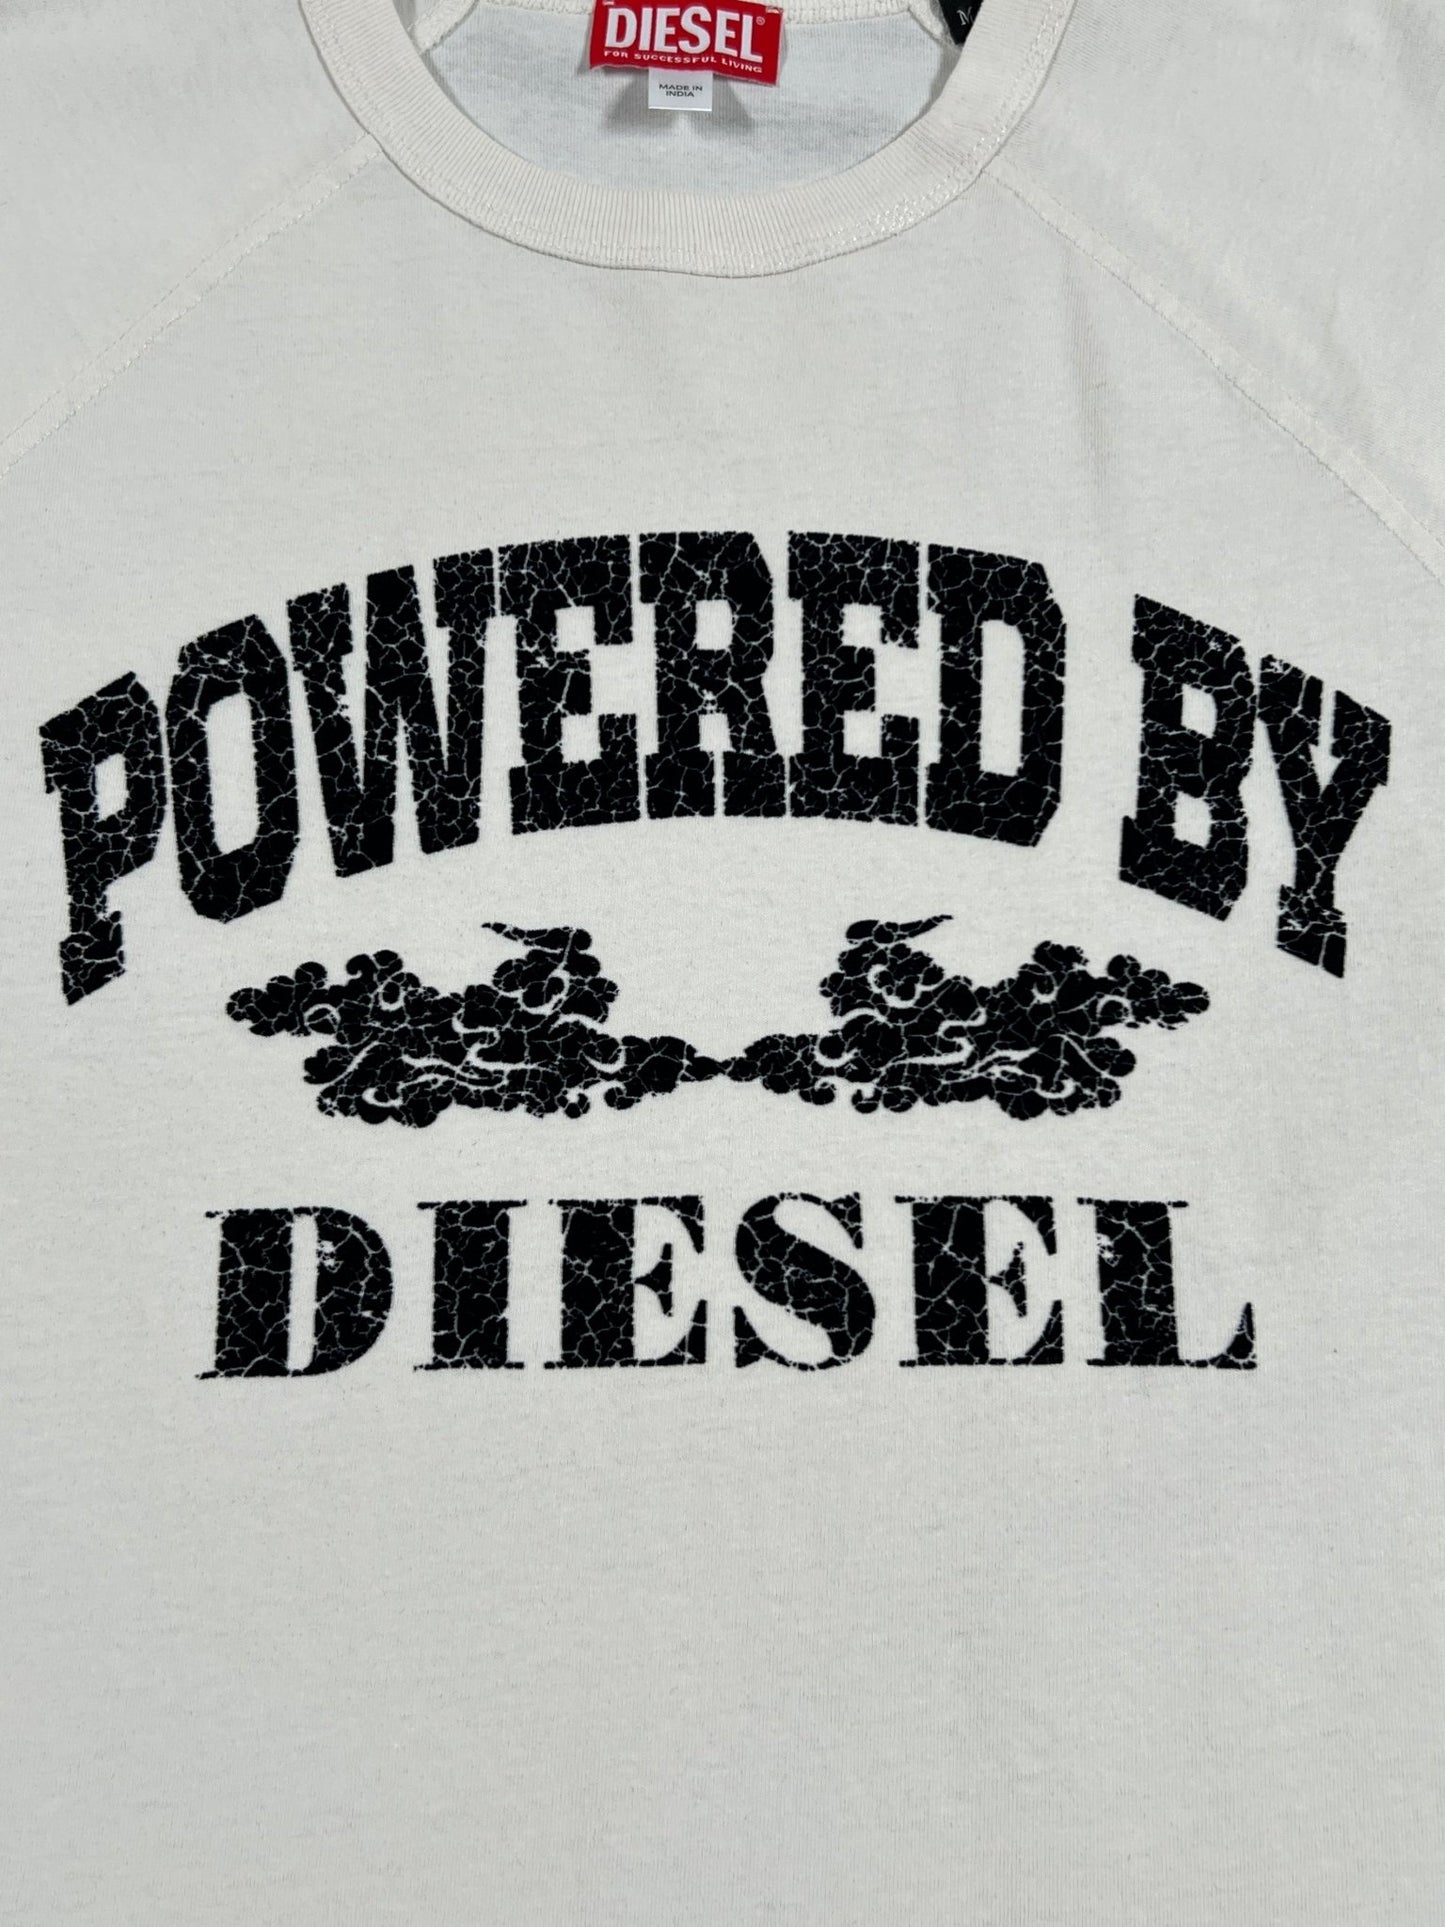 Gray DIESEL T-RUST T-SHIRT WHITE with "powered by diesel" logo printed on the front.